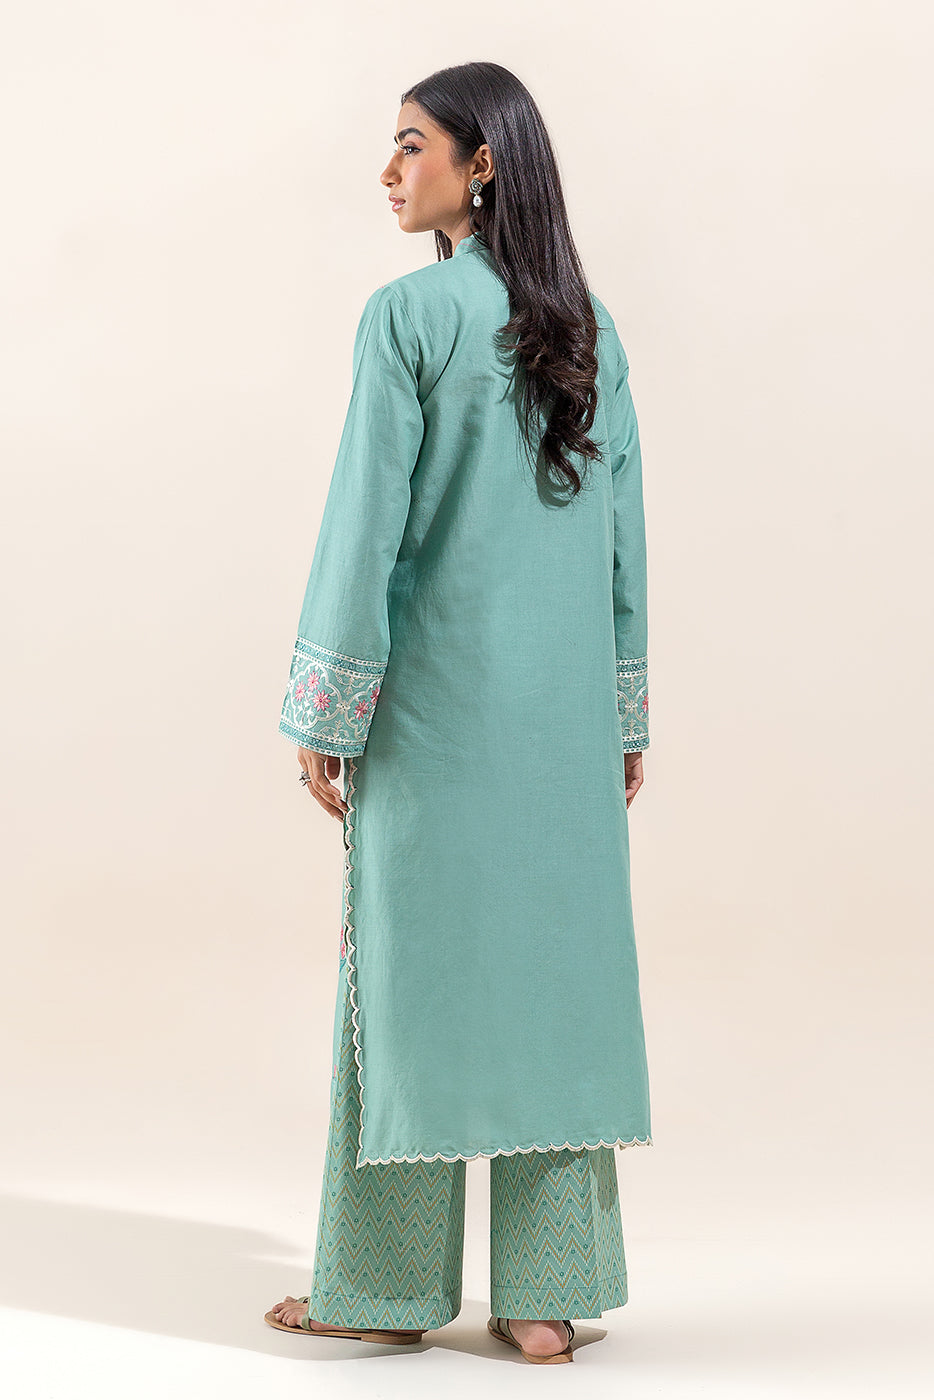 2 PIECE EMBROIDERED LAWN SUIT-DREAM ORNATE (UNSTITCHED)